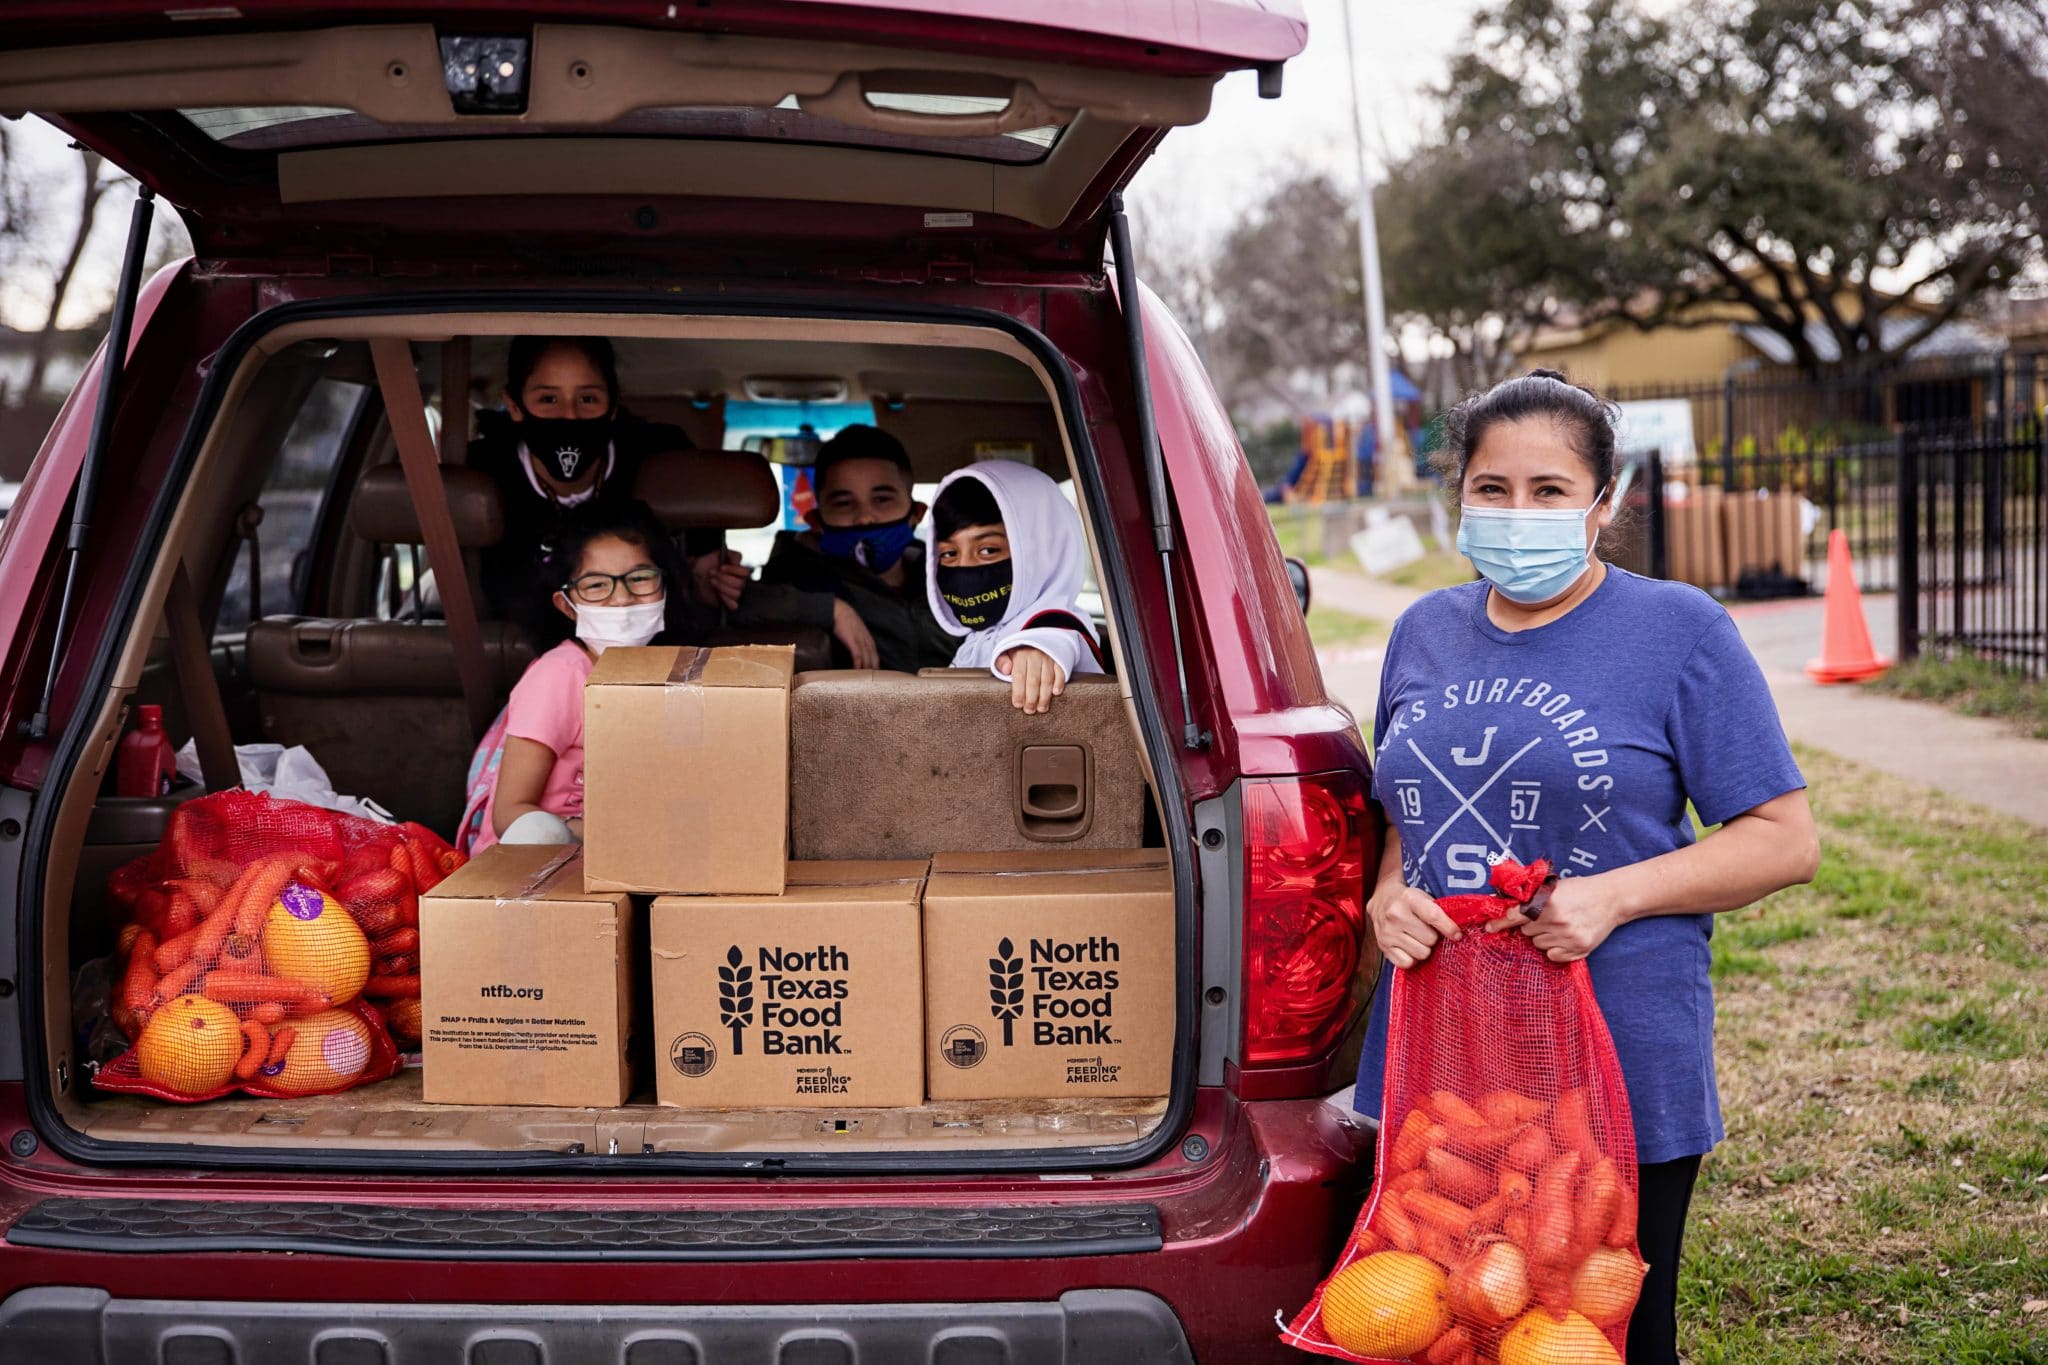 Mother holding a bag of produce next to a car with her children and North Texas Food Bank boxes